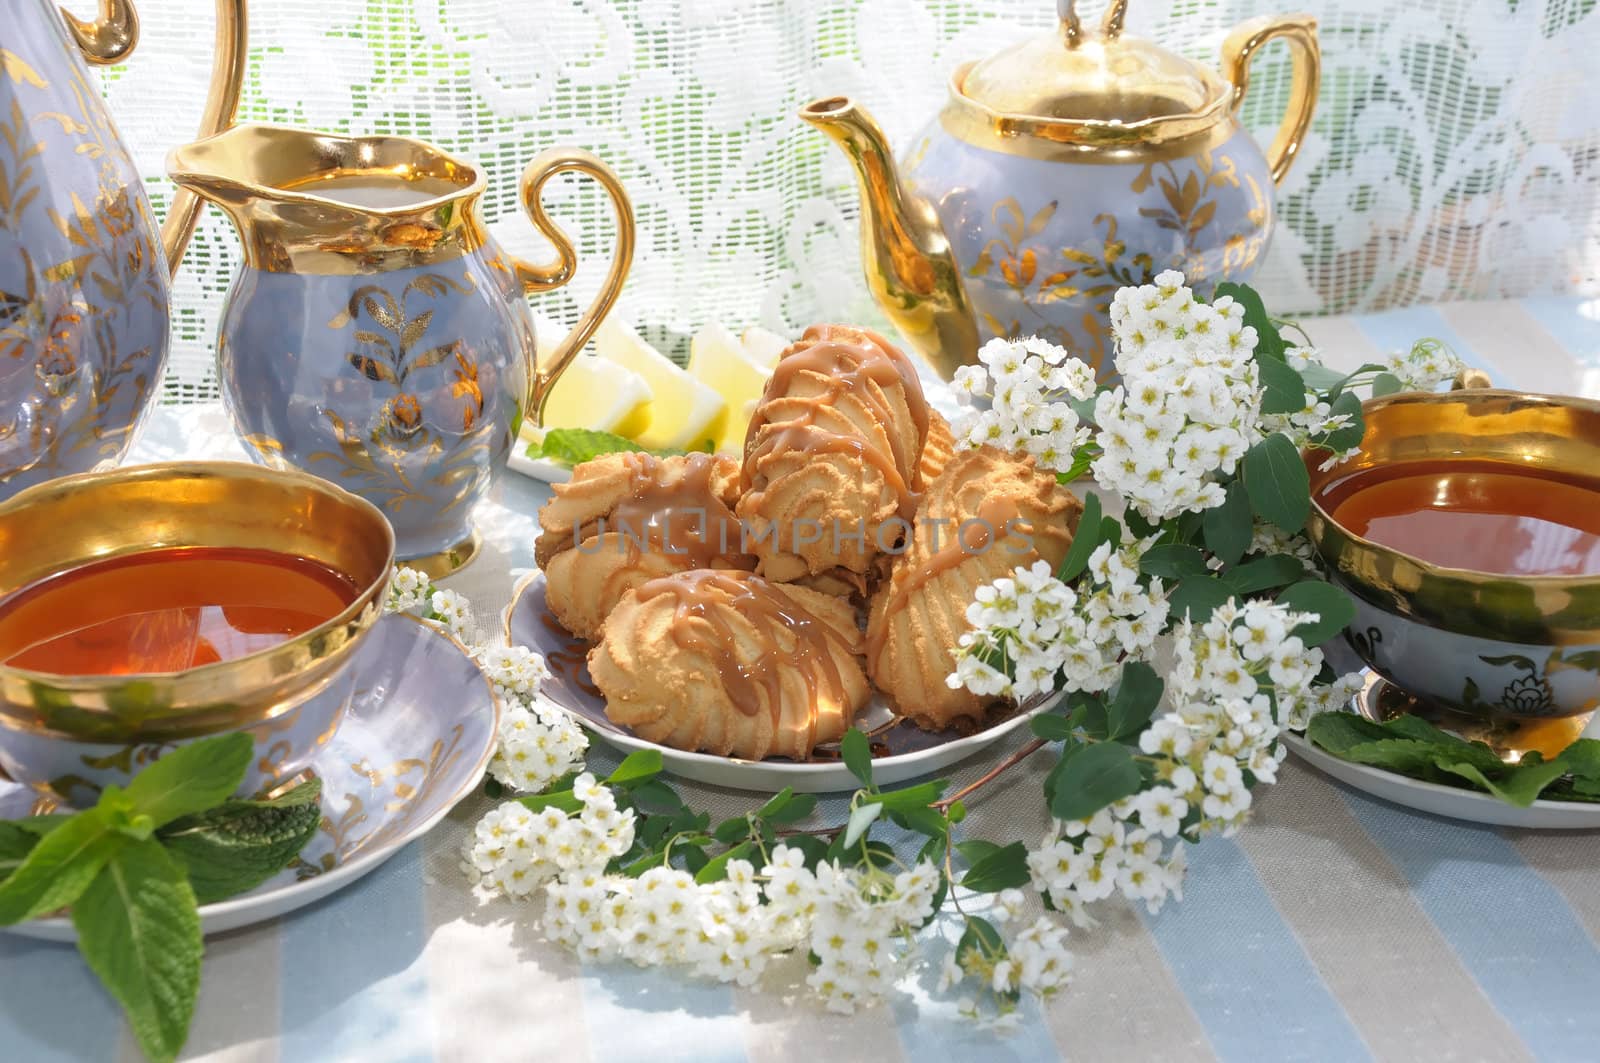  Morning tea with biscuits by Apolonia